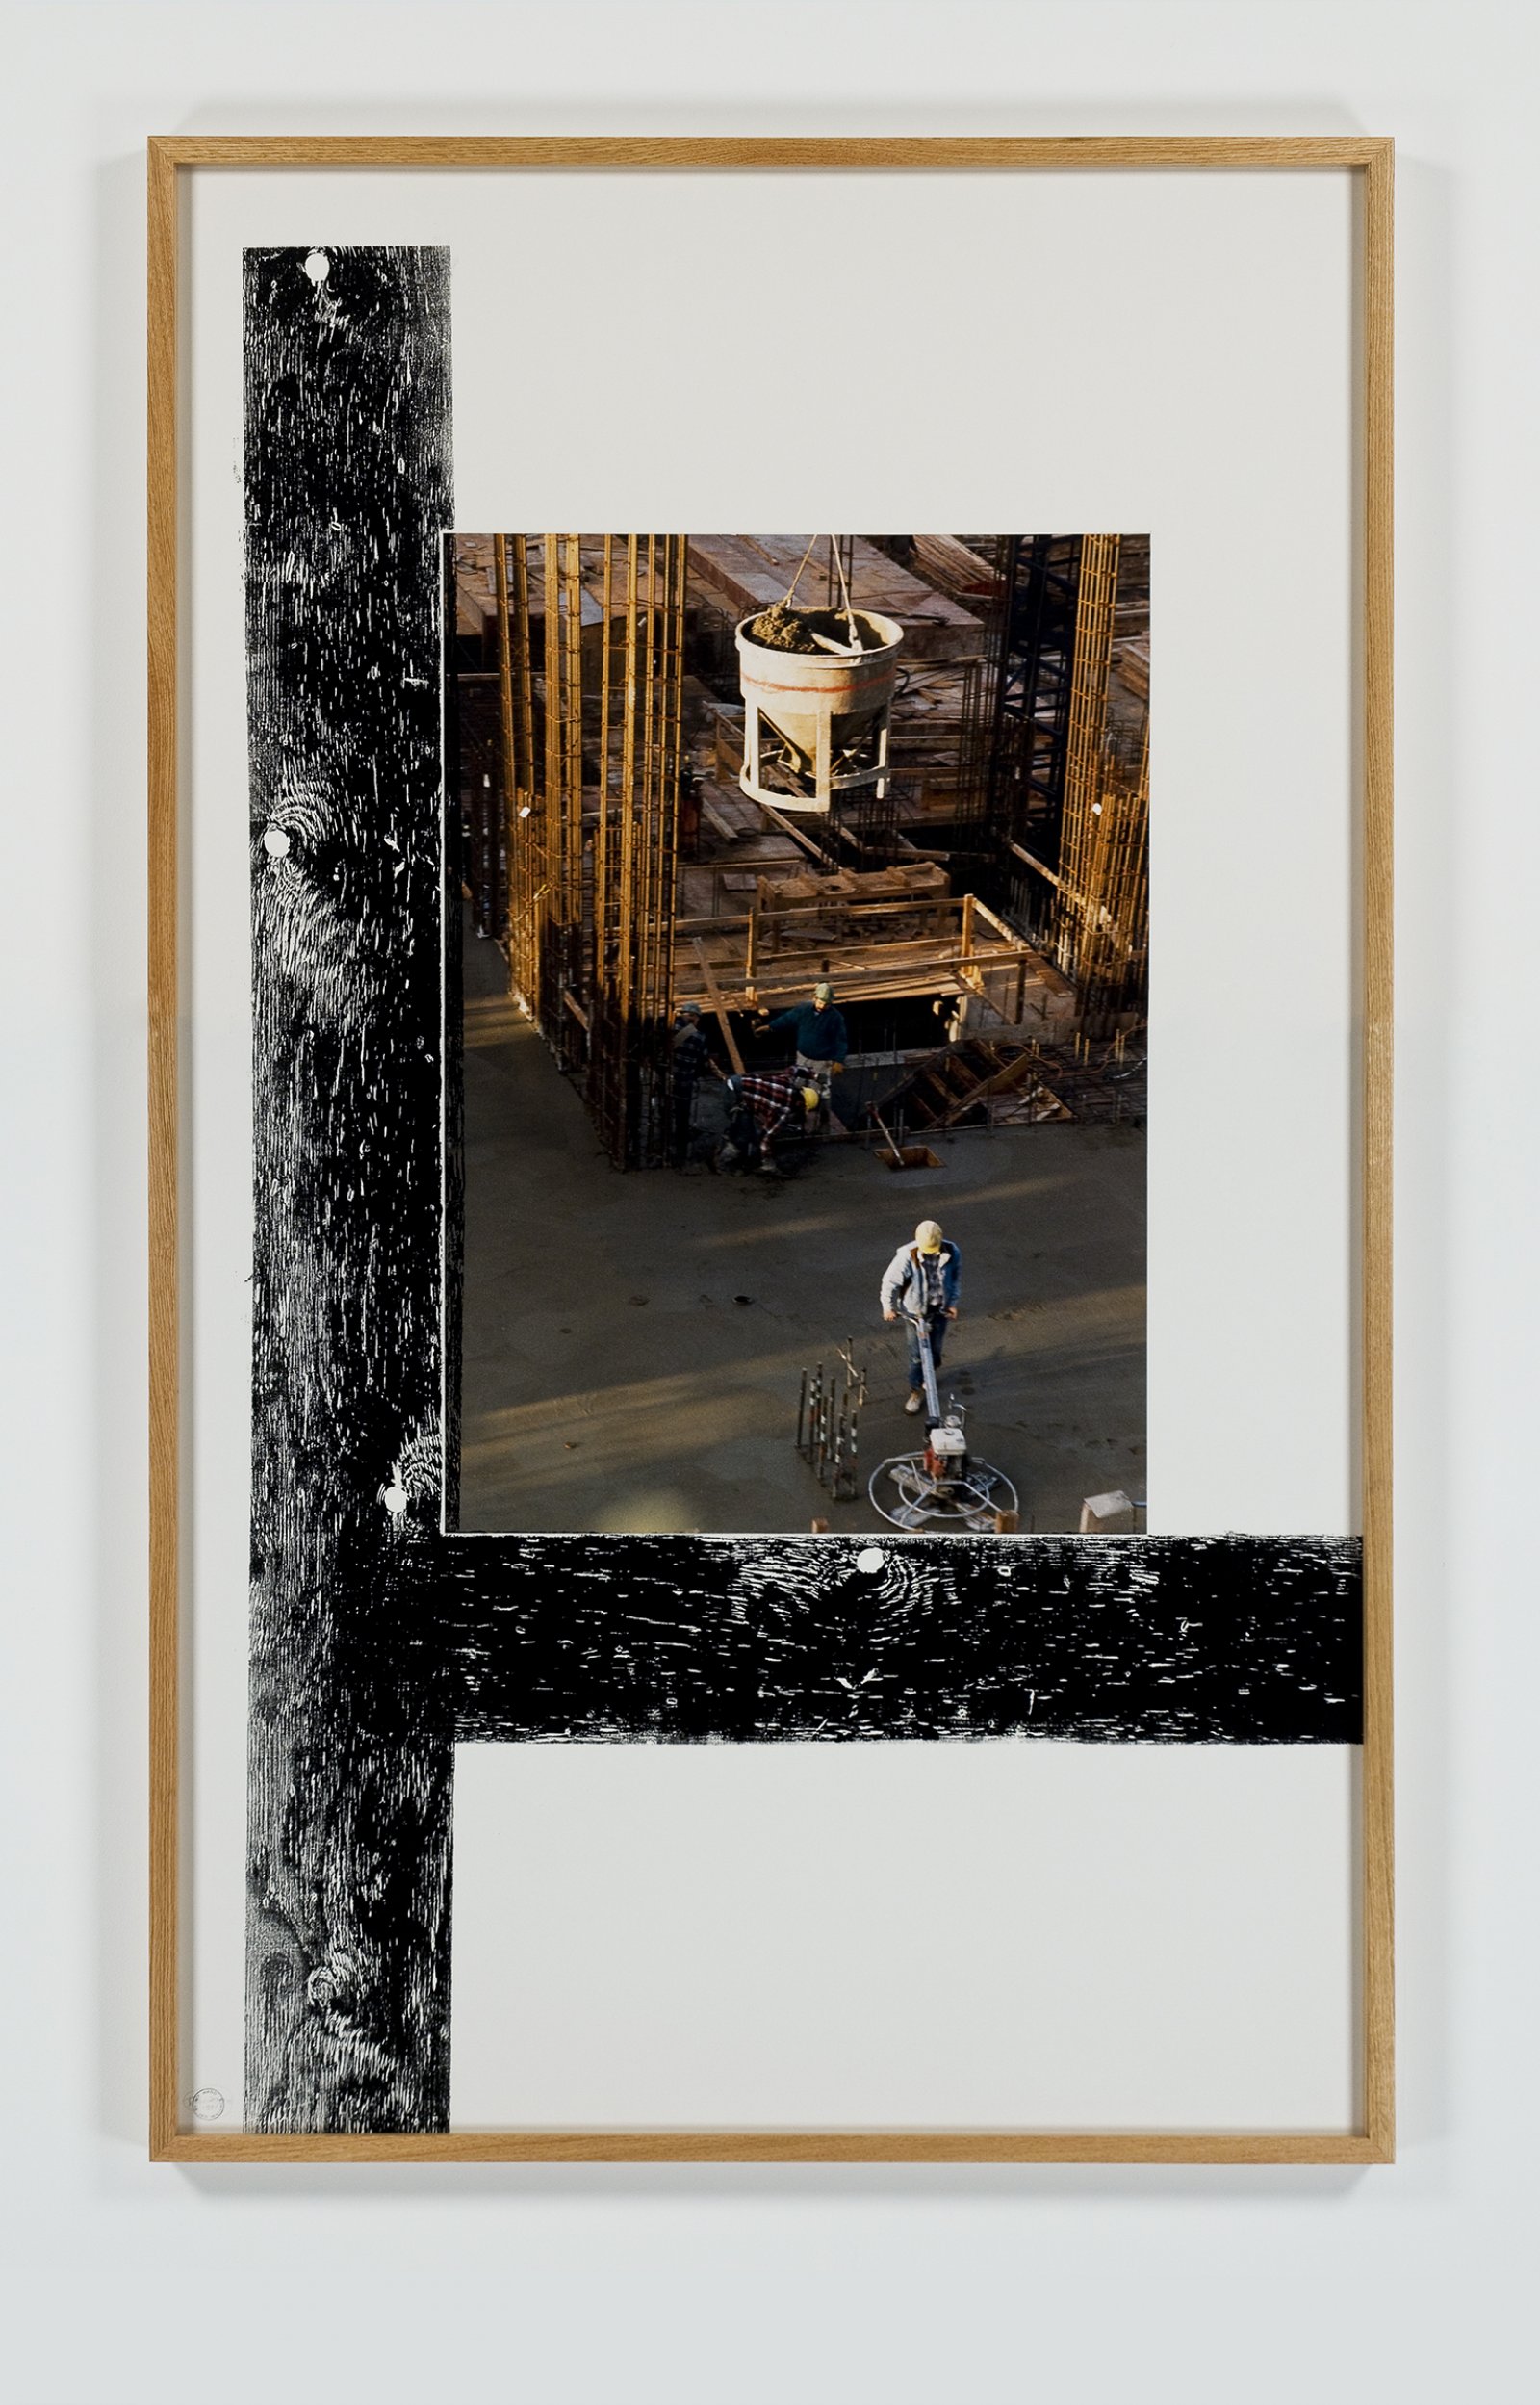 ​Ian Wallace, Construction Site I & II, 1992, 2 photo and ink monoprints on paper, each 77 x 47 in. (196 x 119 cm) ​ by Ian Wallace